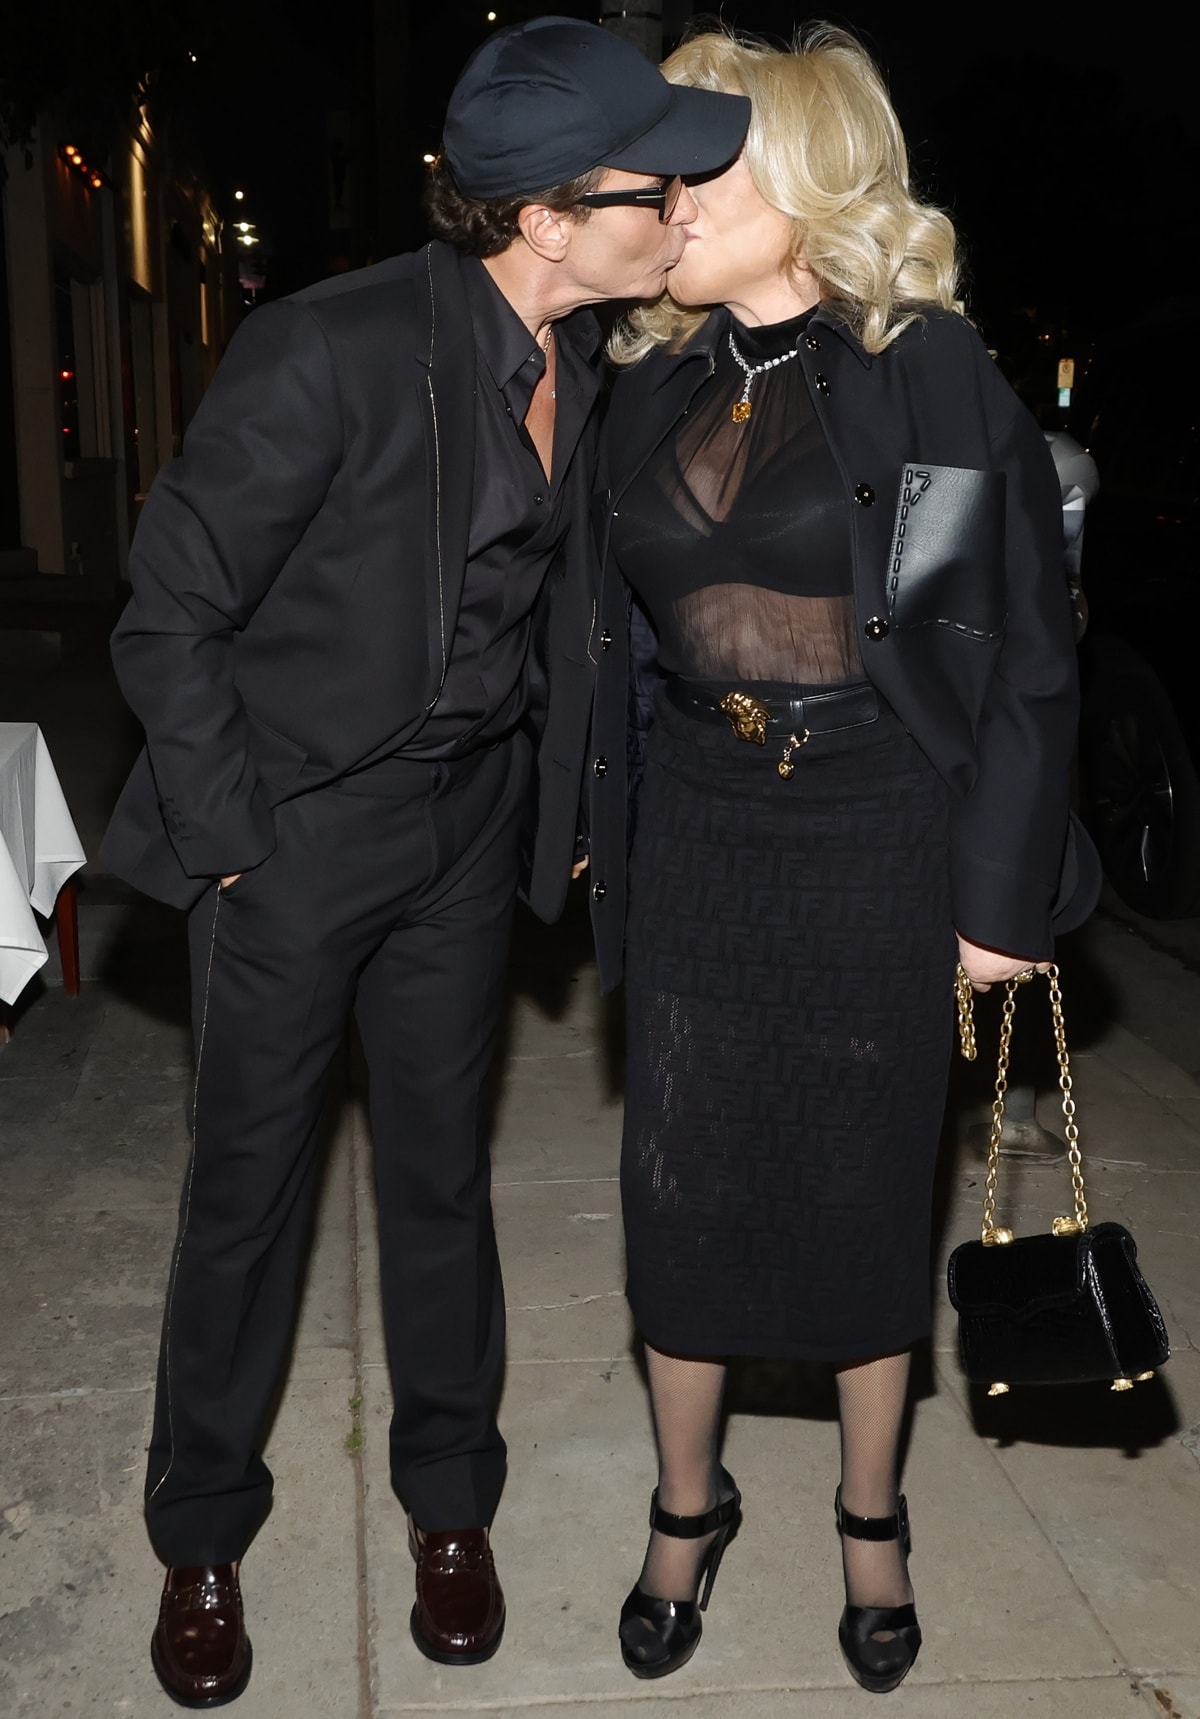 Lloyd Klein and Jocelyn Wildenstein share a kiss as they hold an official engagement dinner with friends at Casablanca Moroccan Kitchen in Los Angeles